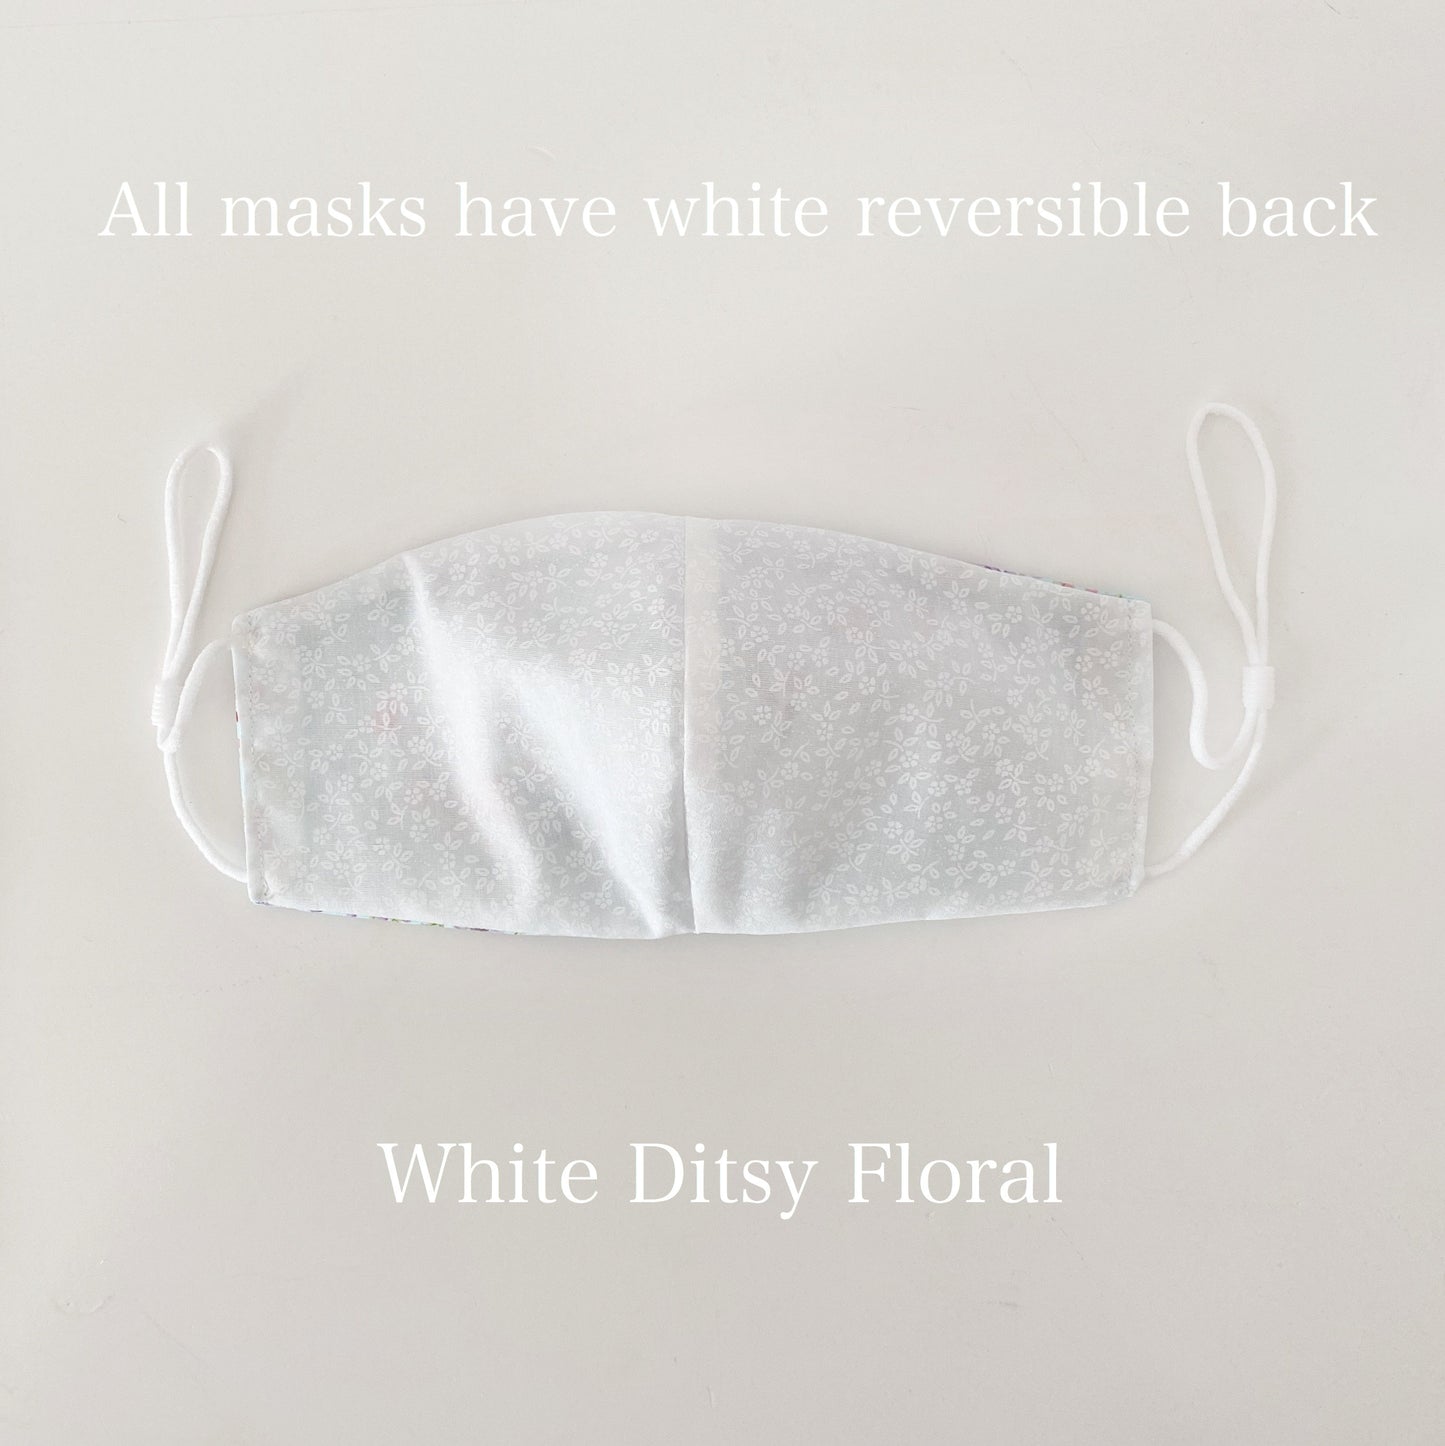 GINGHAM FLORAL REVERSIBLE 2 in 1 Mask Adjustable Super Soft Elastic. Washable Reusable homemade face masks Double layer cotton made in U.K.